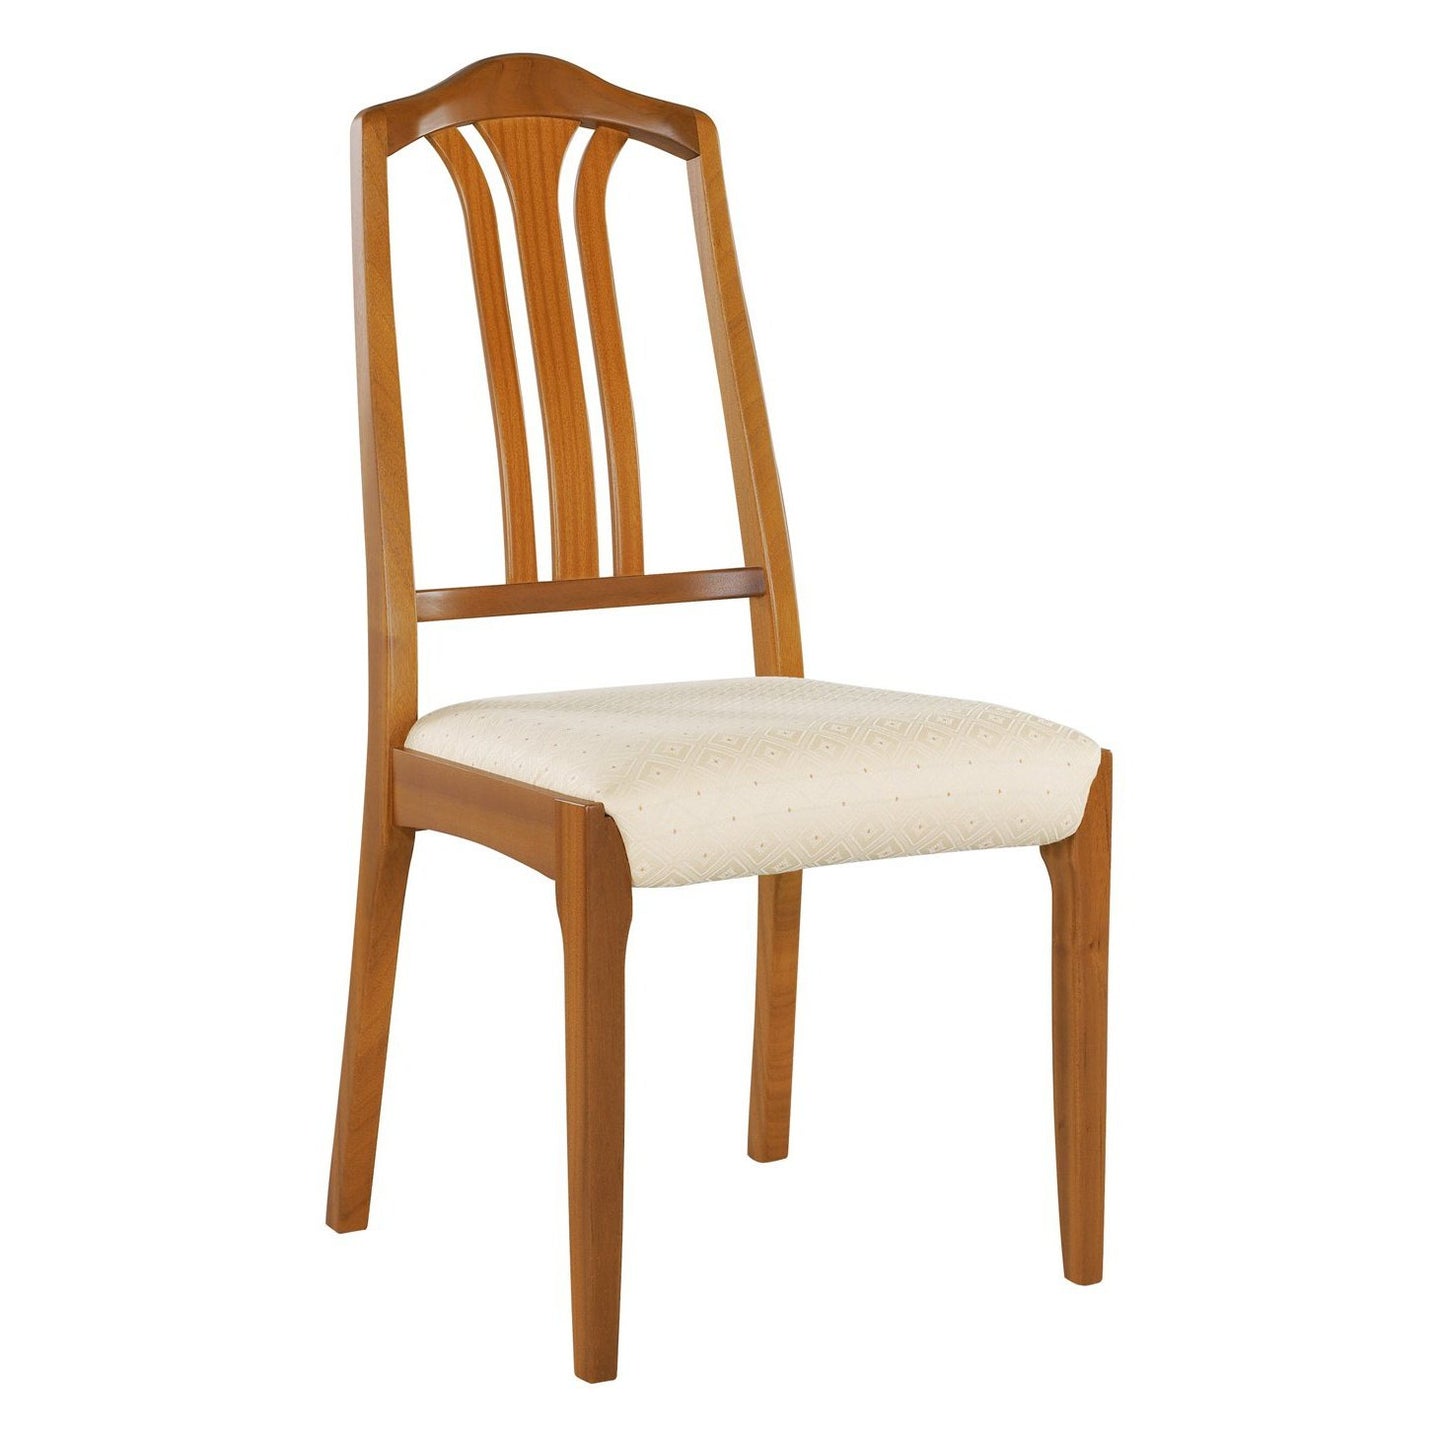 Set of 6 Nathan Slat Back Dining Chairs in Oak Finish.